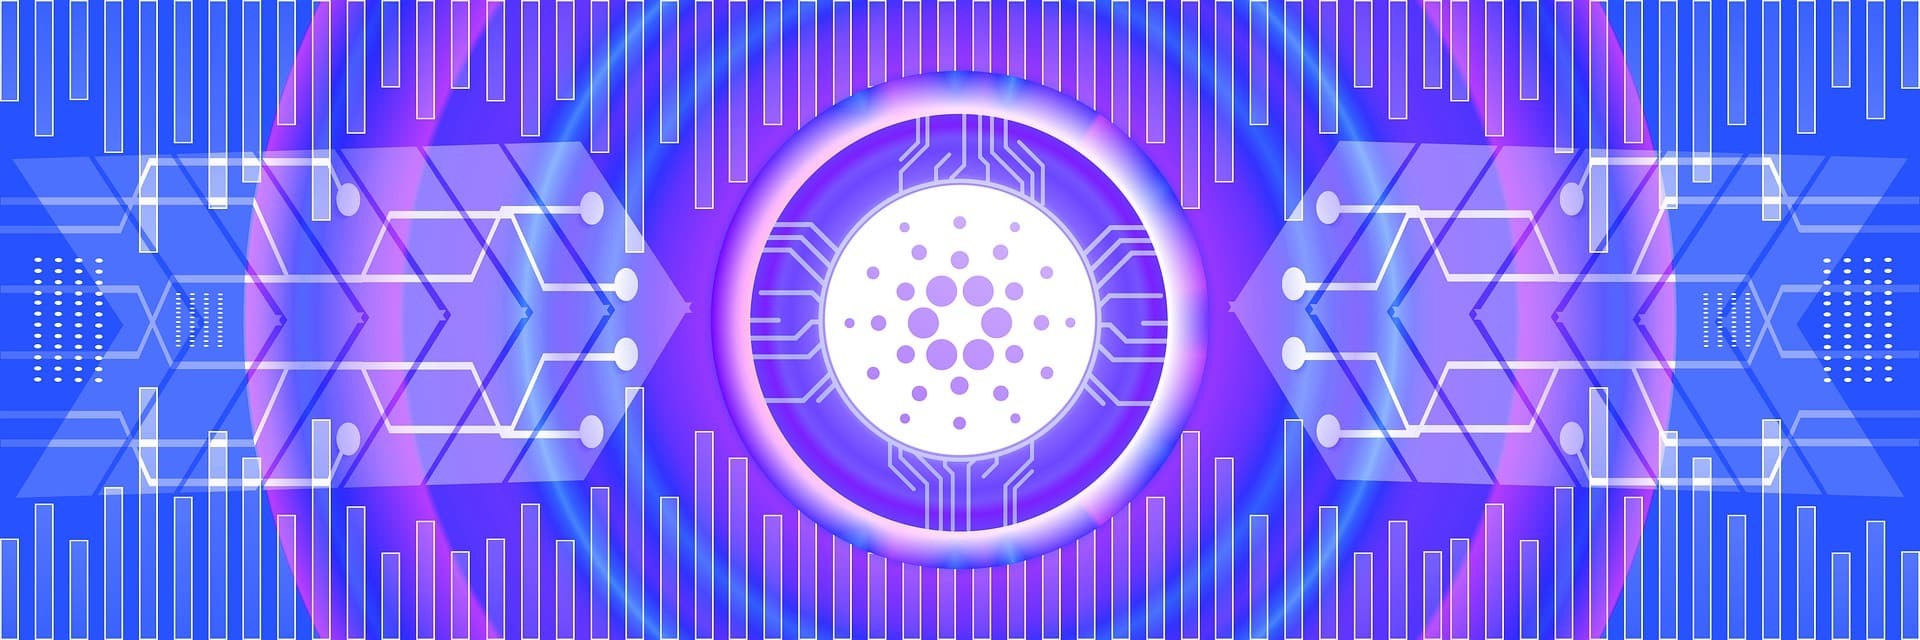 Cardano investors have every reason to be cautious given ADA’s current range